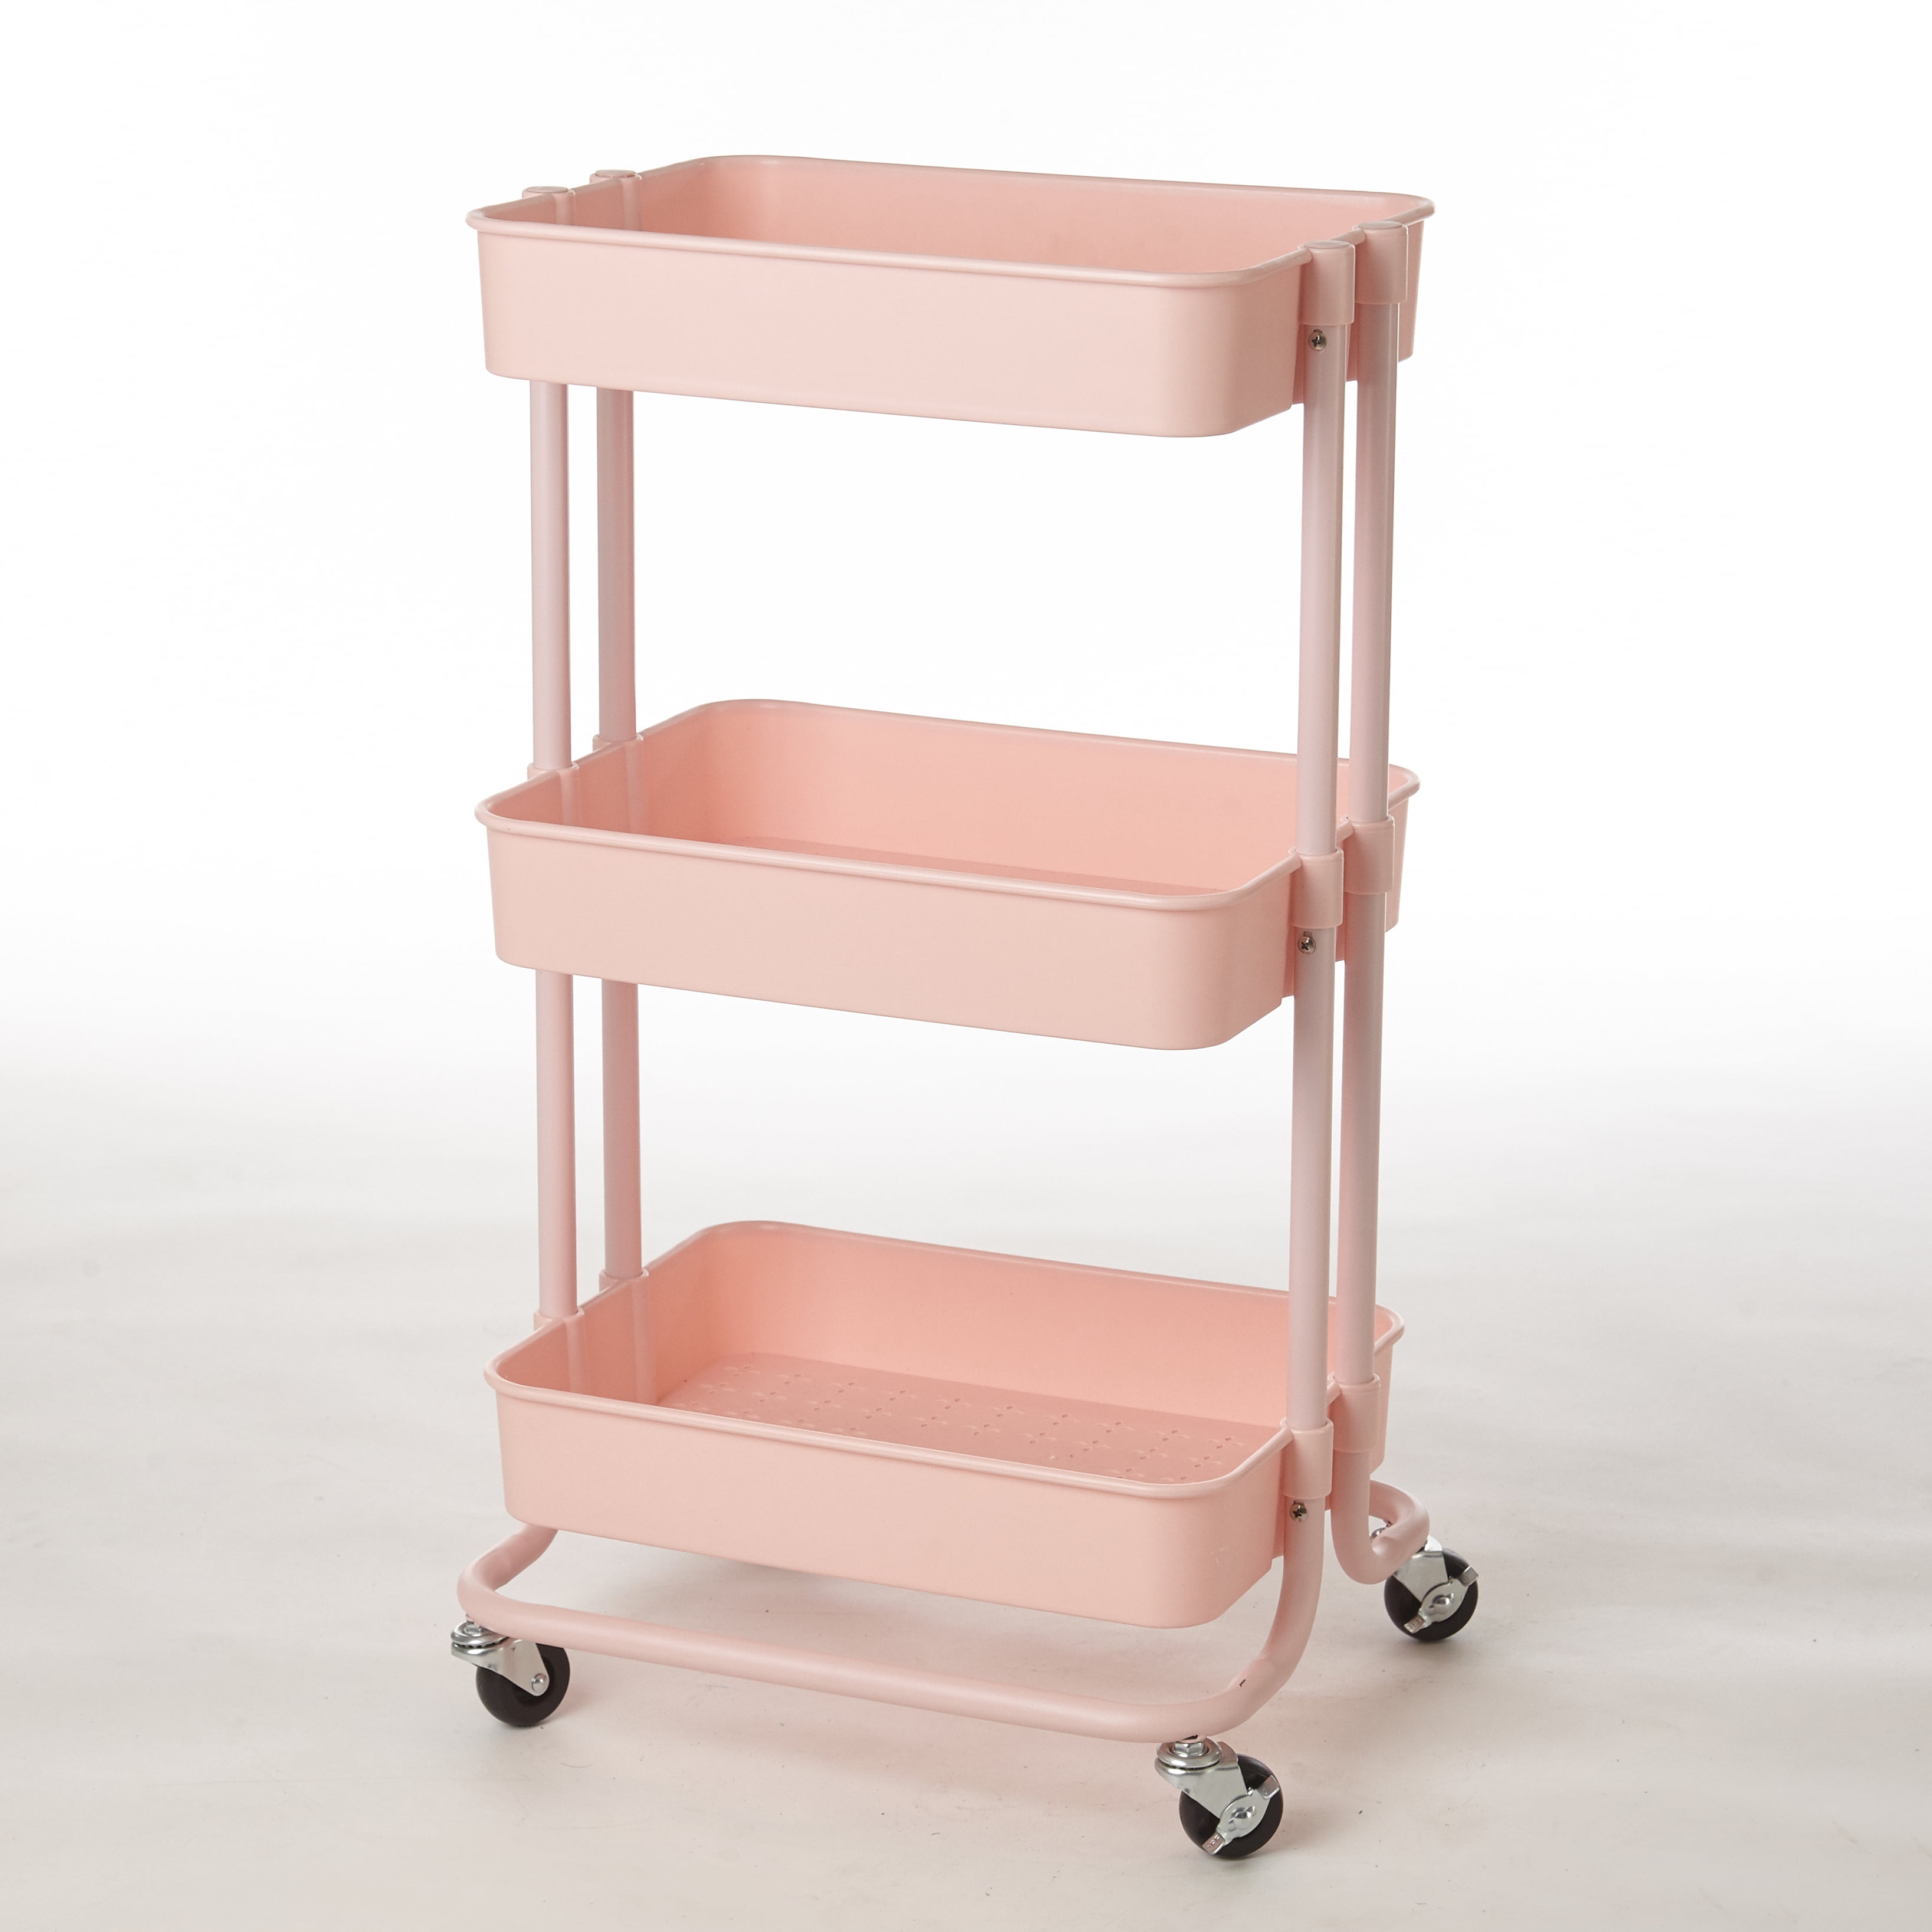 Details about   Utility Cart Trolley Organizer Storage 3Tier Tool Service Rolling Salon SpaY201H 